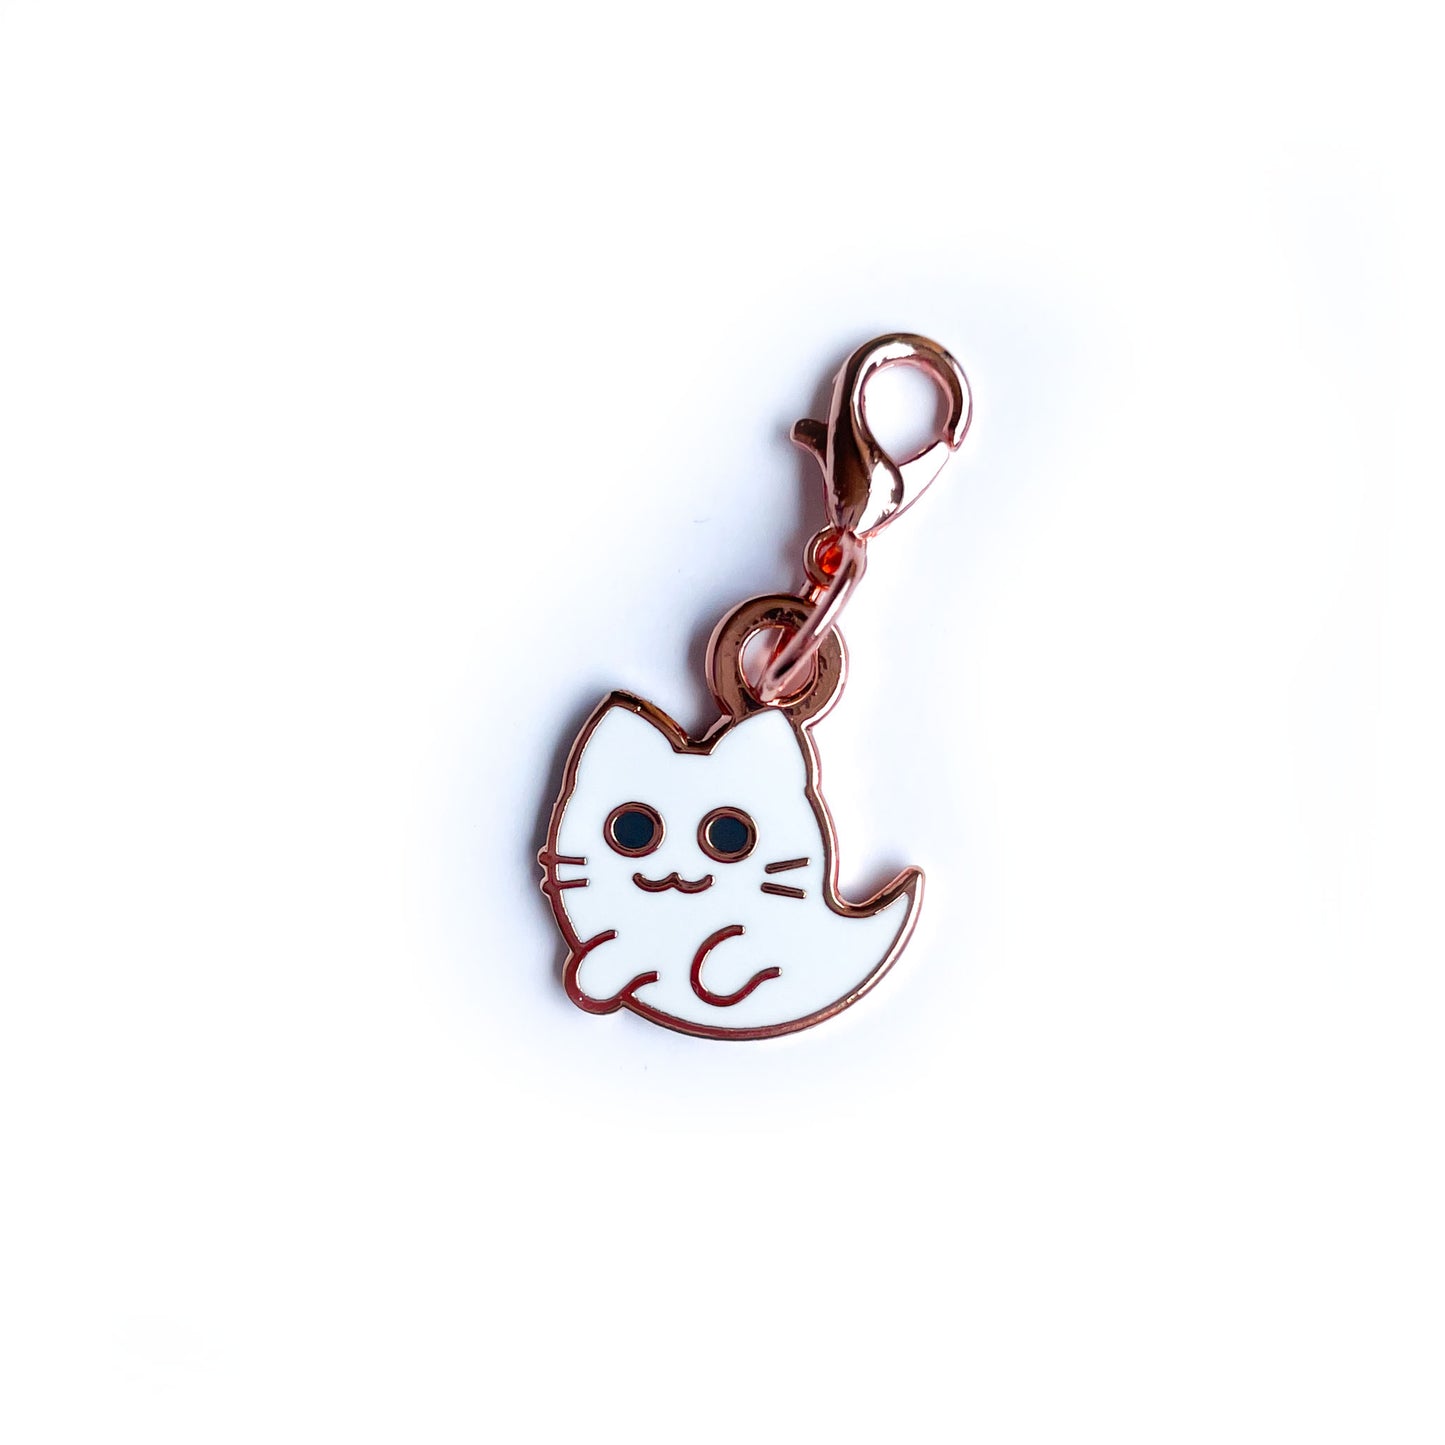 A lobster claw clasp charm shaped like a cute kitty ghost with whiskers. 